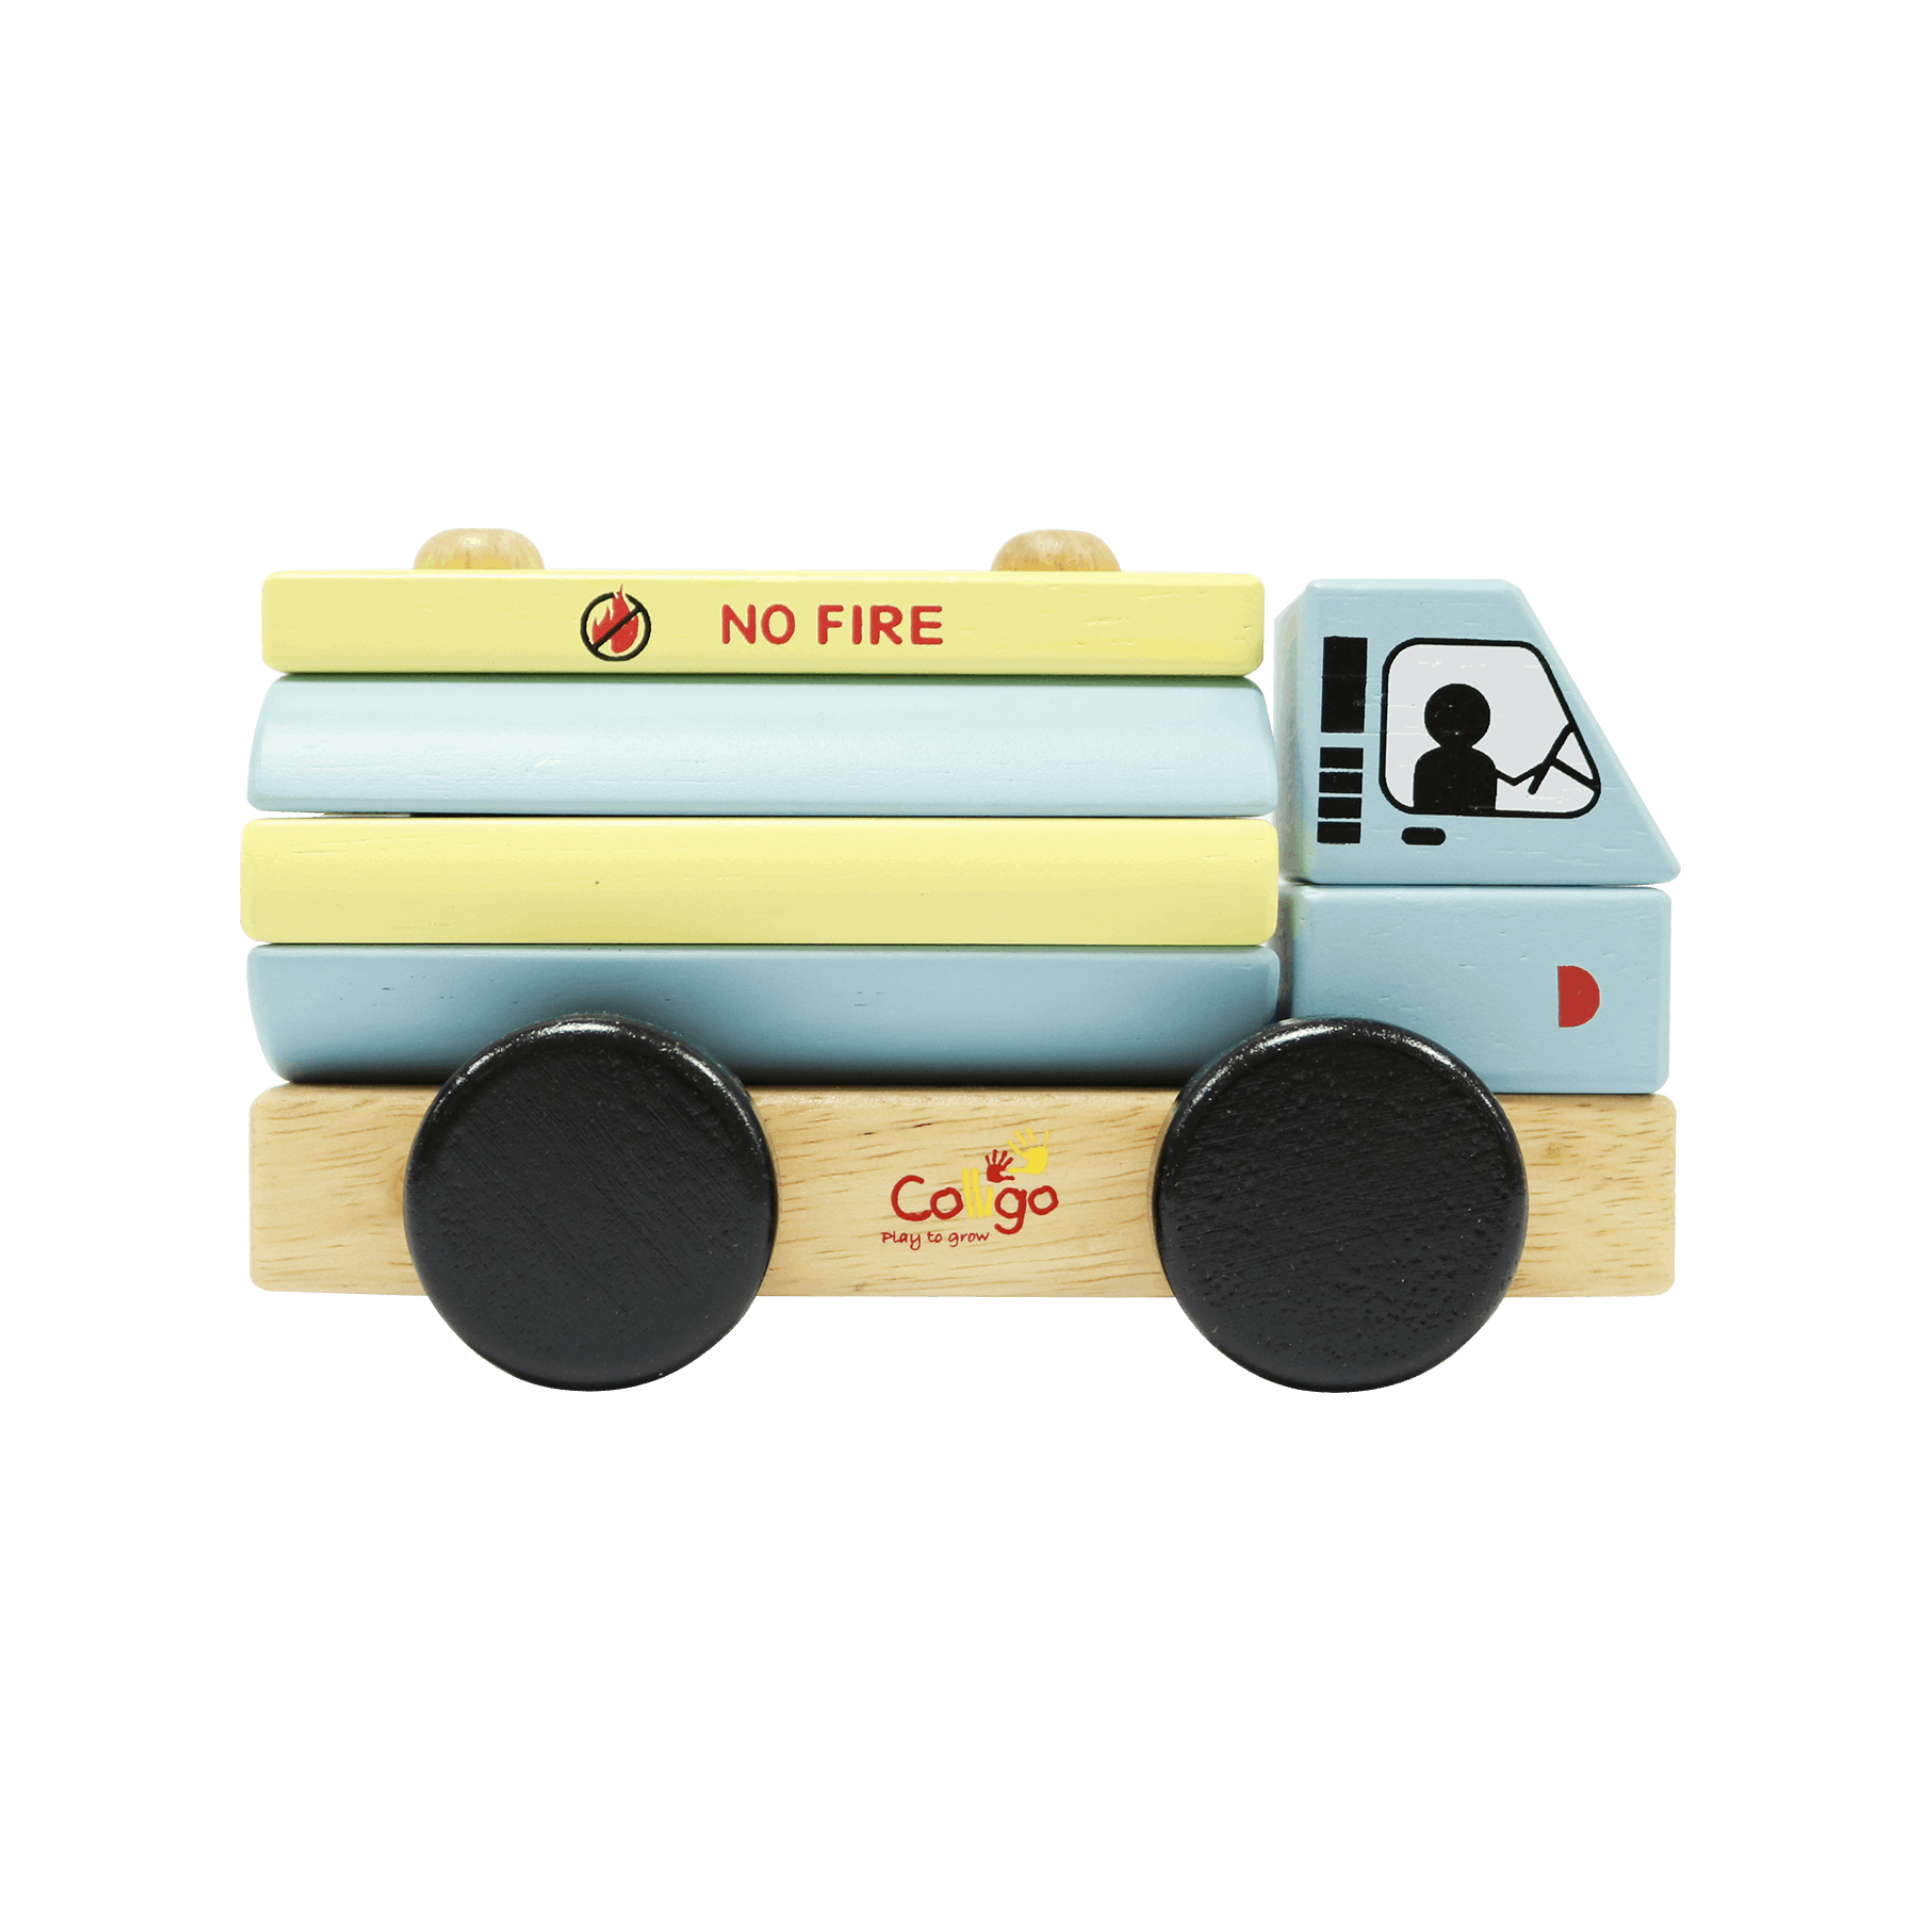 Assembly tank truck game